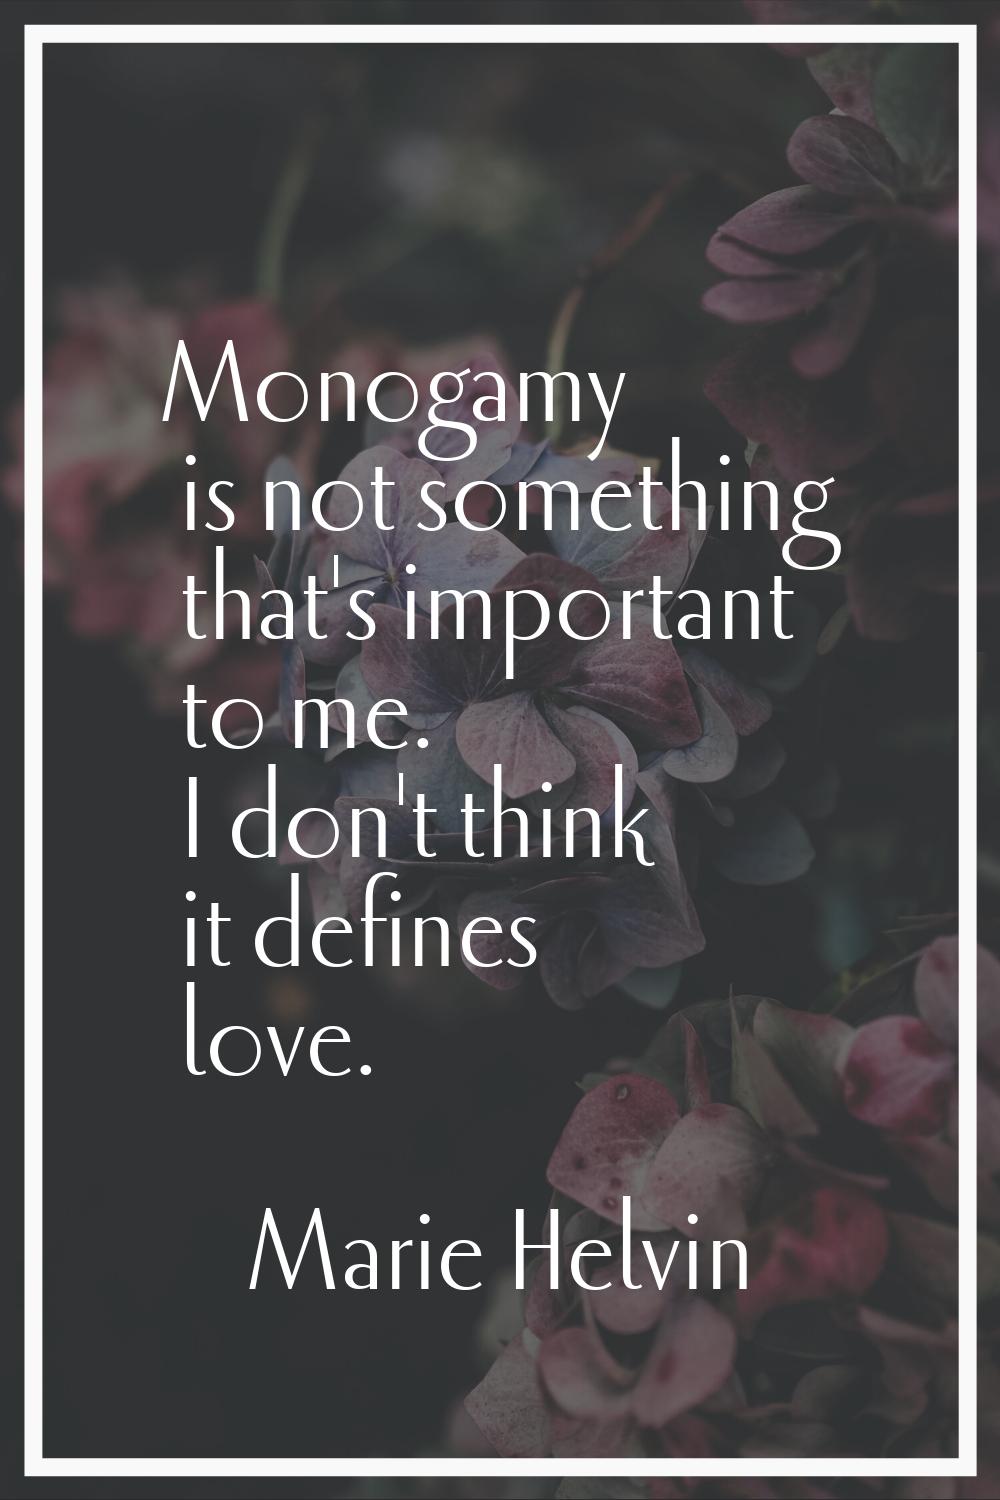 Monogamy is not something that's important to me. I don't think it defines love.